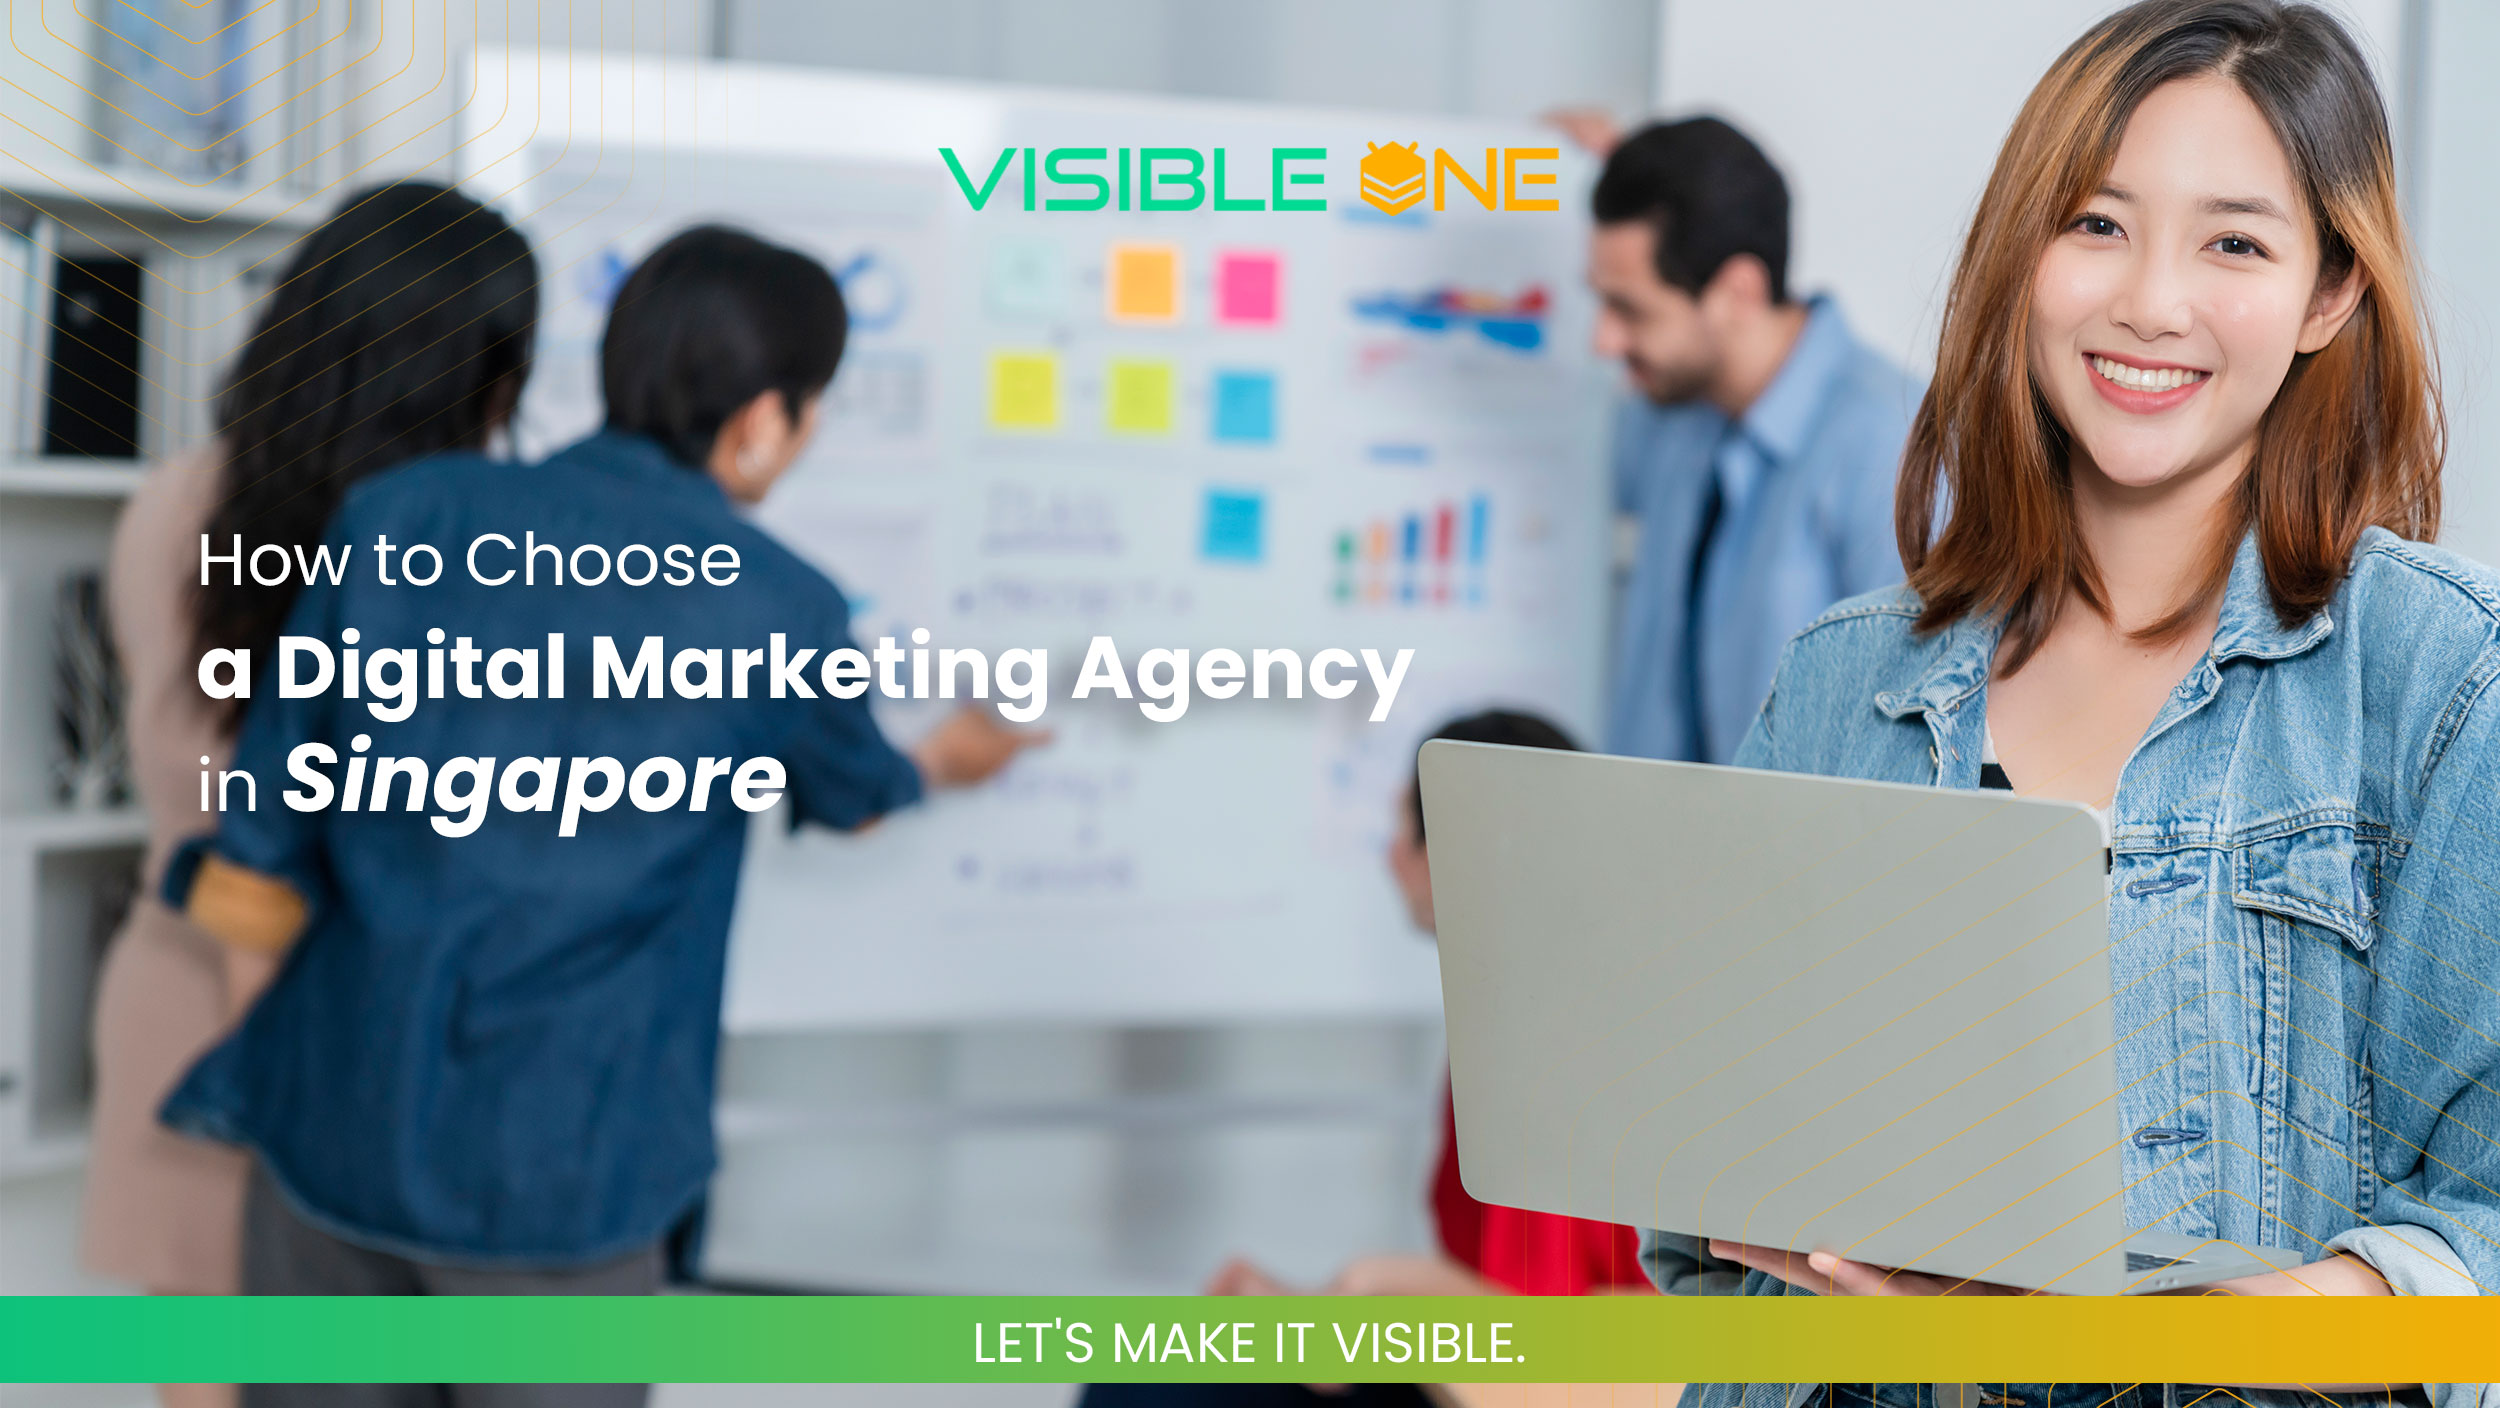 How to Choose a Digital Marketing Agency in Singapore?